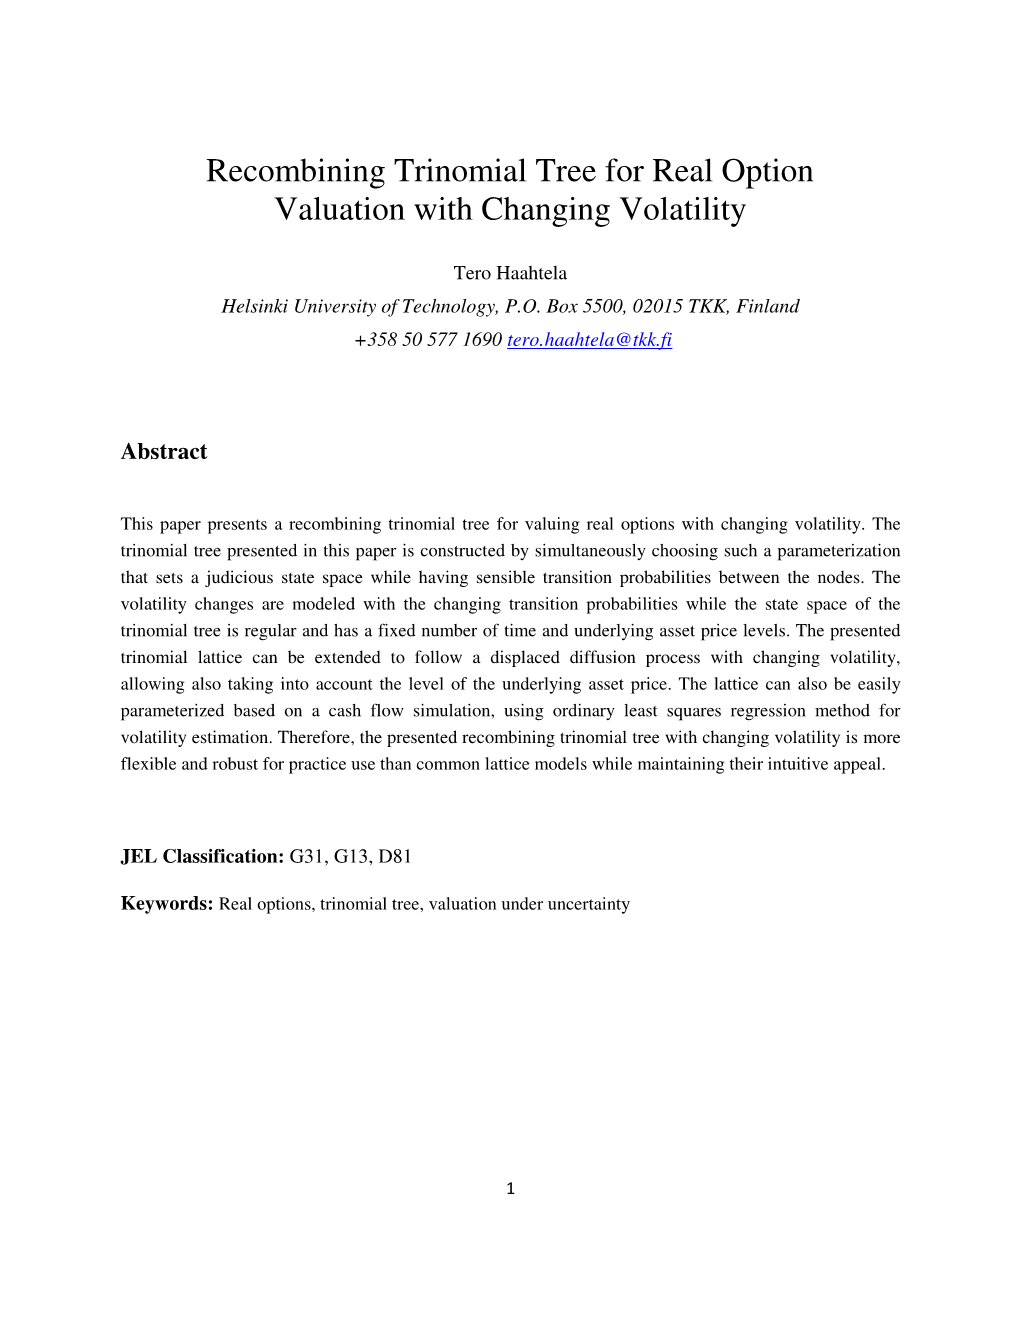 Recombining Trinomial Tree for Real Option Valuation with Changing Volatility